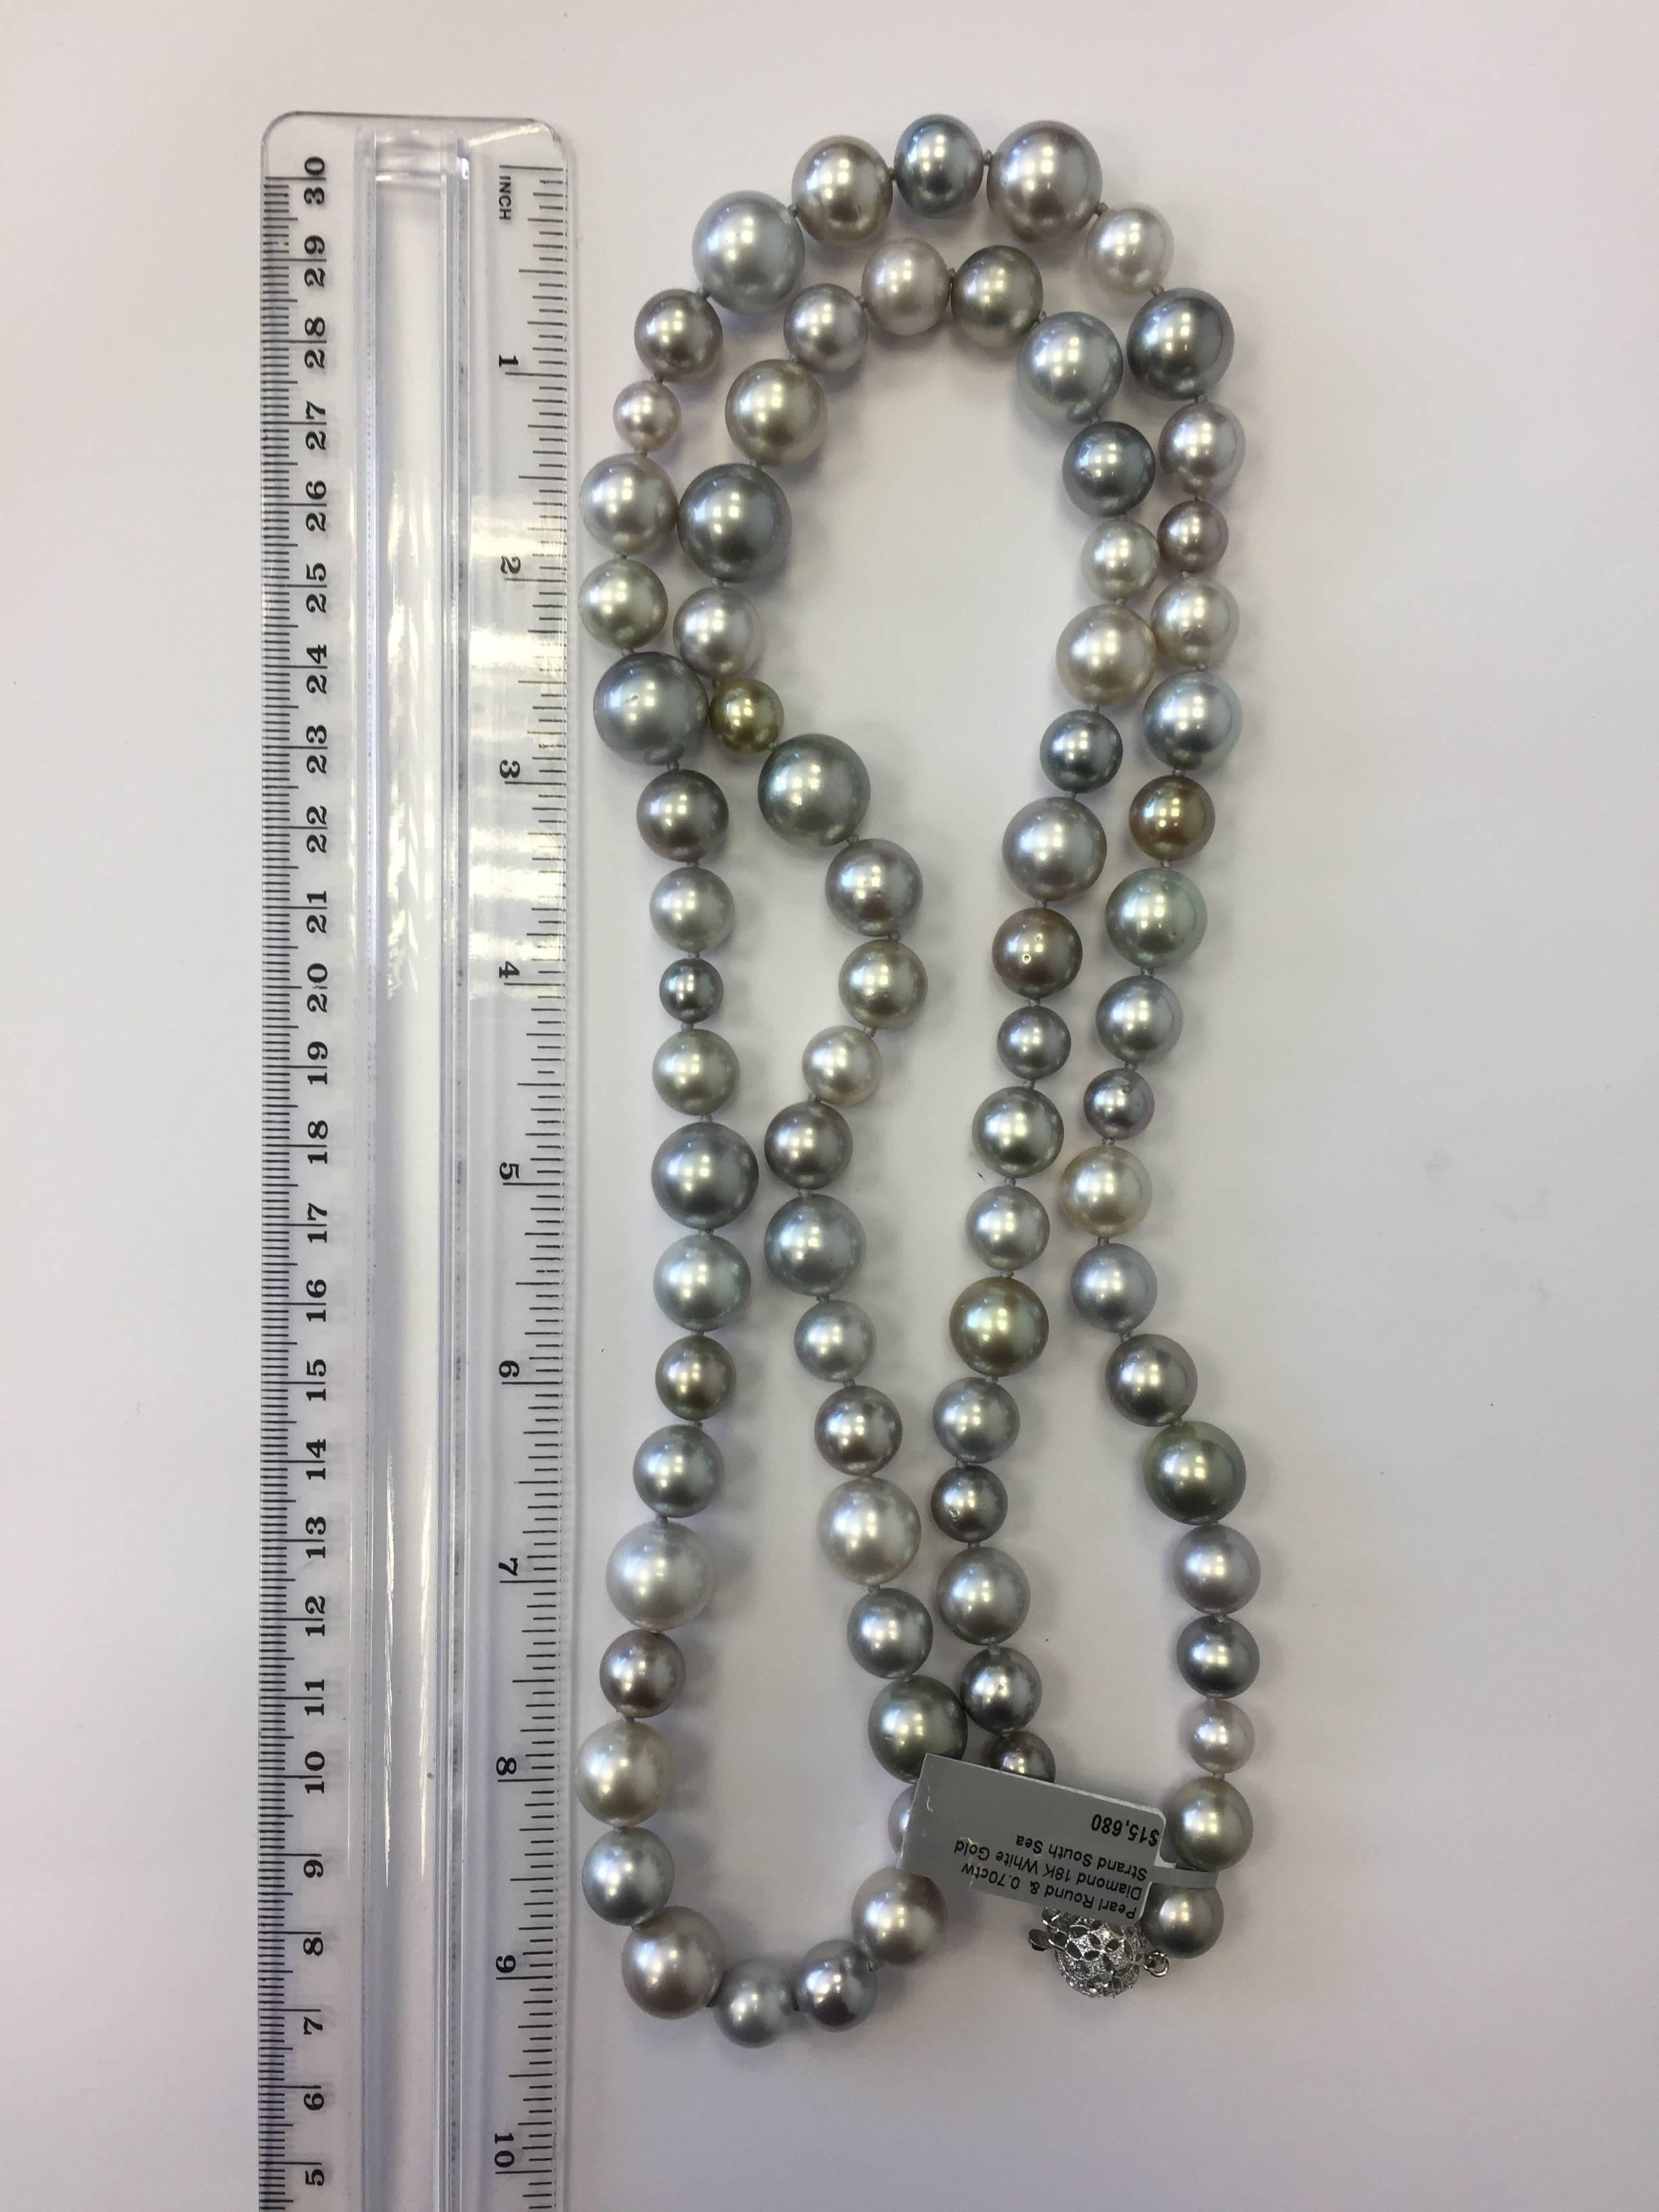 This gorgeous Tahitian pearl strand is put together with a 0.70 carat diamond pave ball clasp in 18k white gold.  An amazing long length of 48 inches, makes this necklace easy to wear in different ways depending on your mood and the occasion.  A